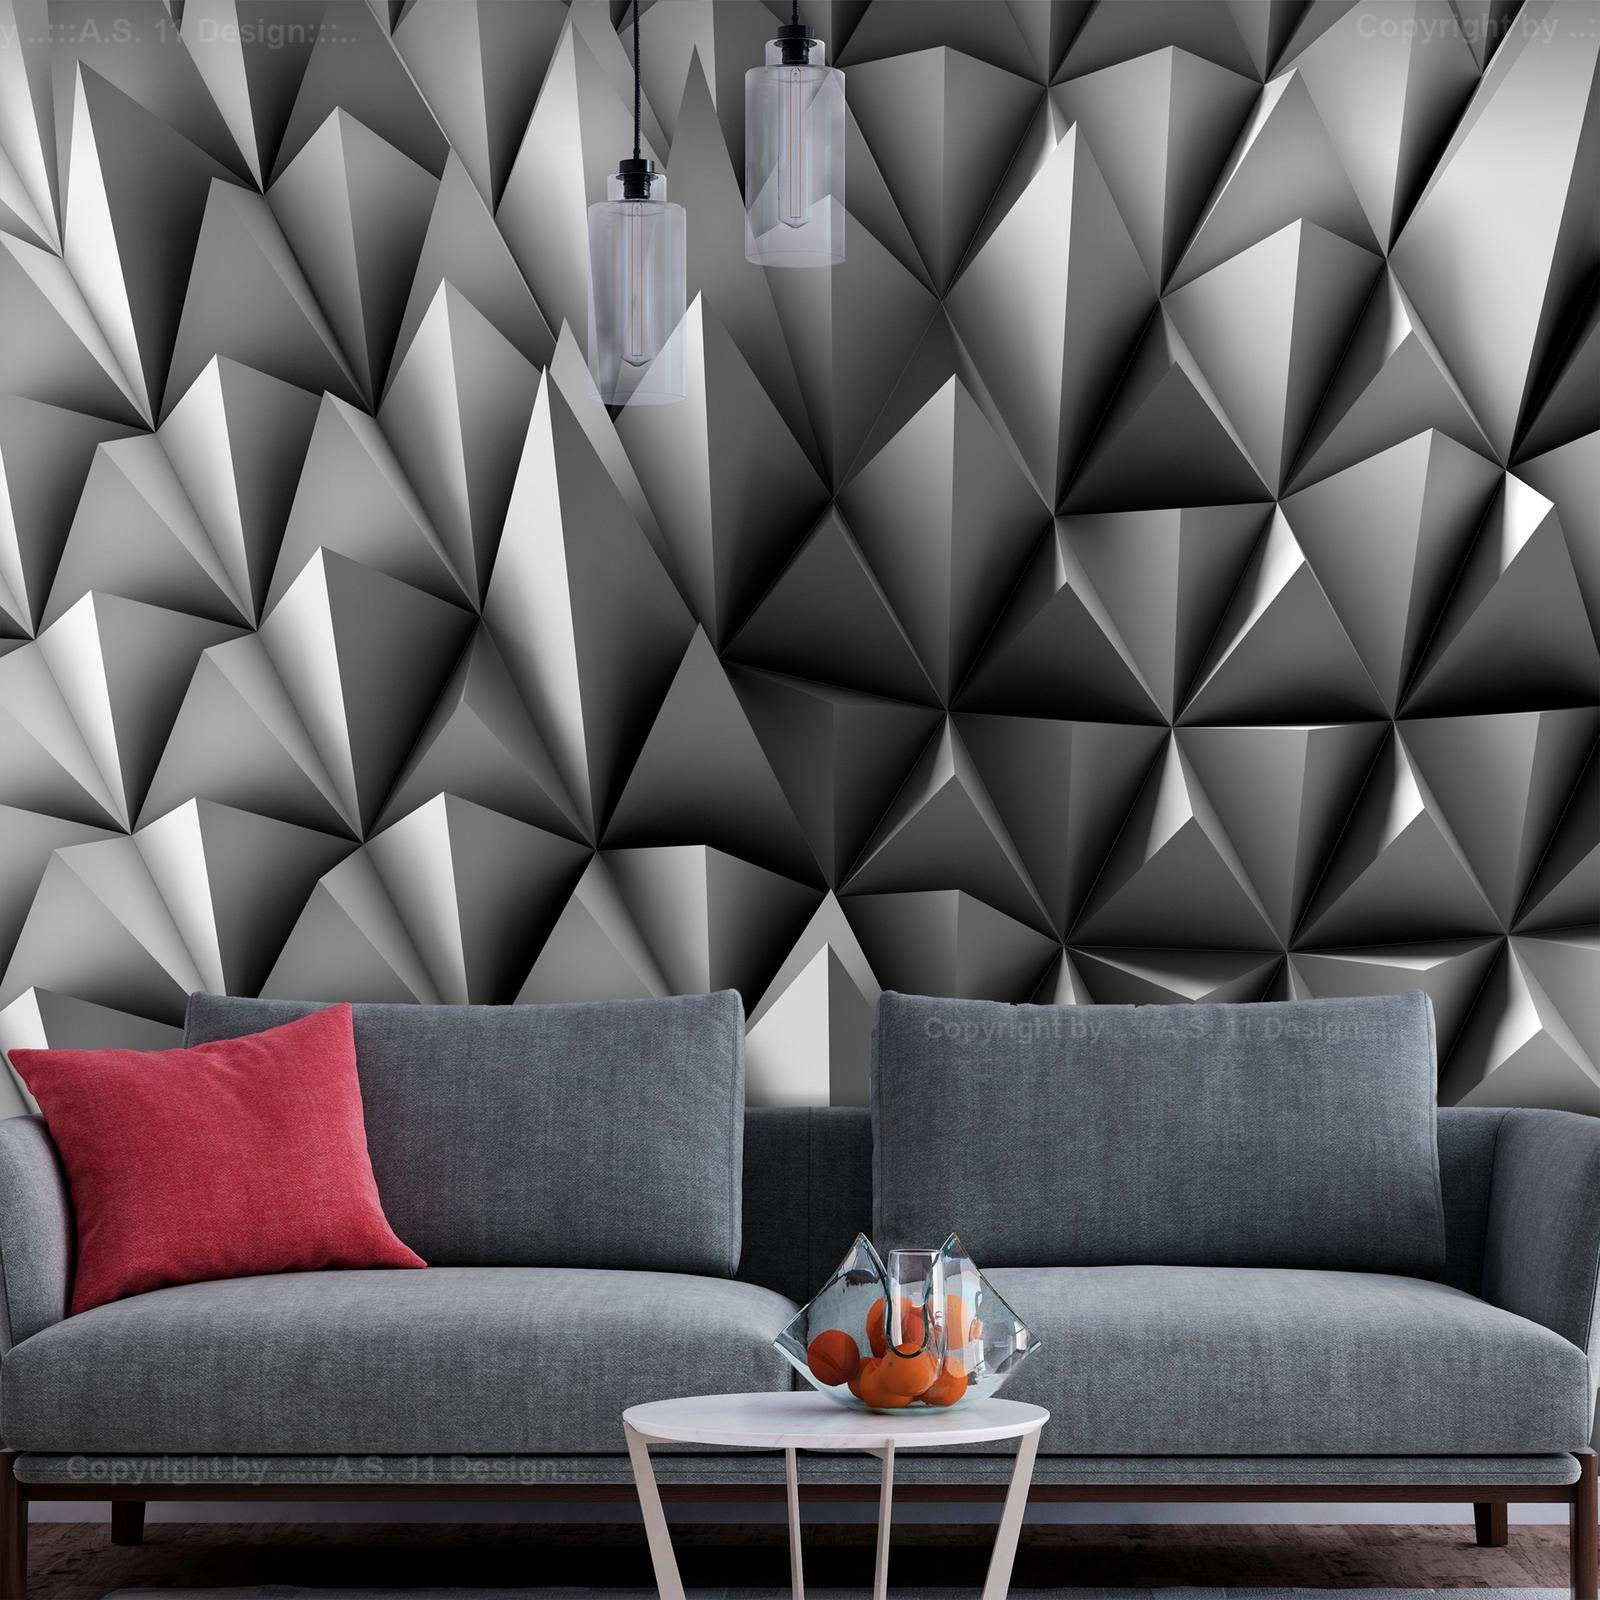 Peel and stick wall mural - Spiky Identity-TipTopHomeDecor